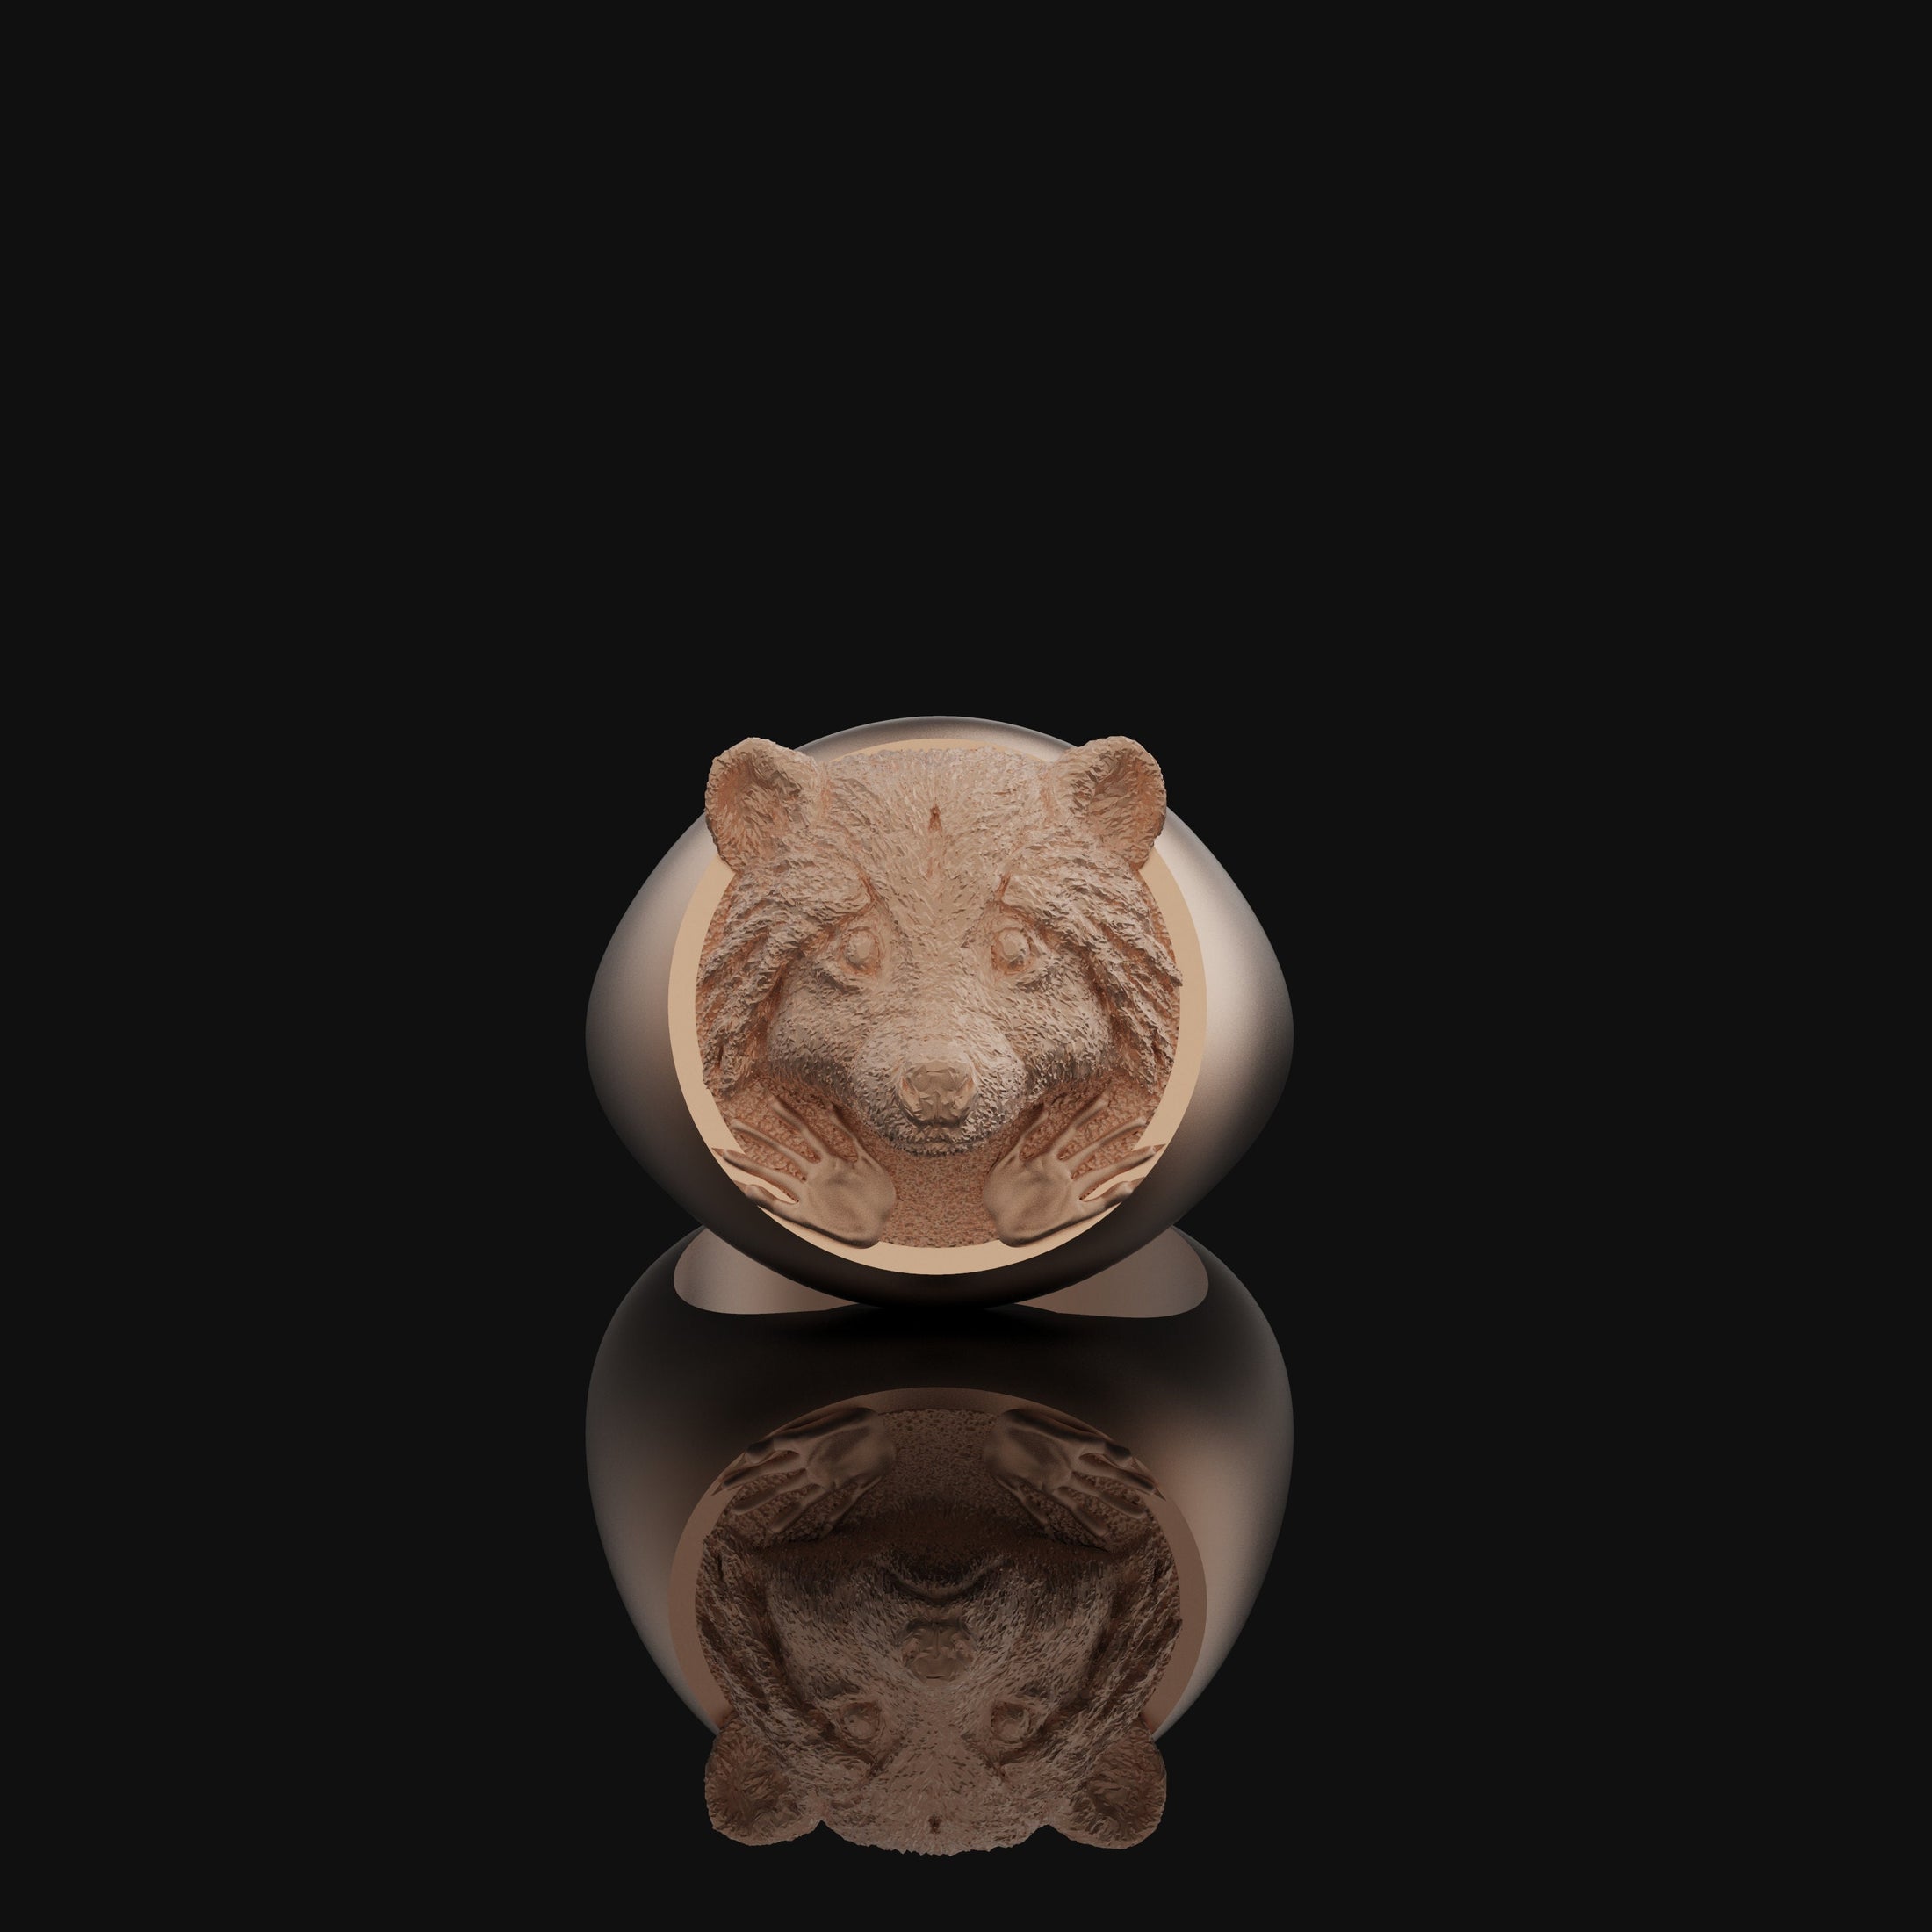 Silver Raccoon Ring, Charming Animal Jewelry, Unique Band for Nature Lovers, Playful Raccoon Design, Perfect Gift Idea Rose Gold - Matte